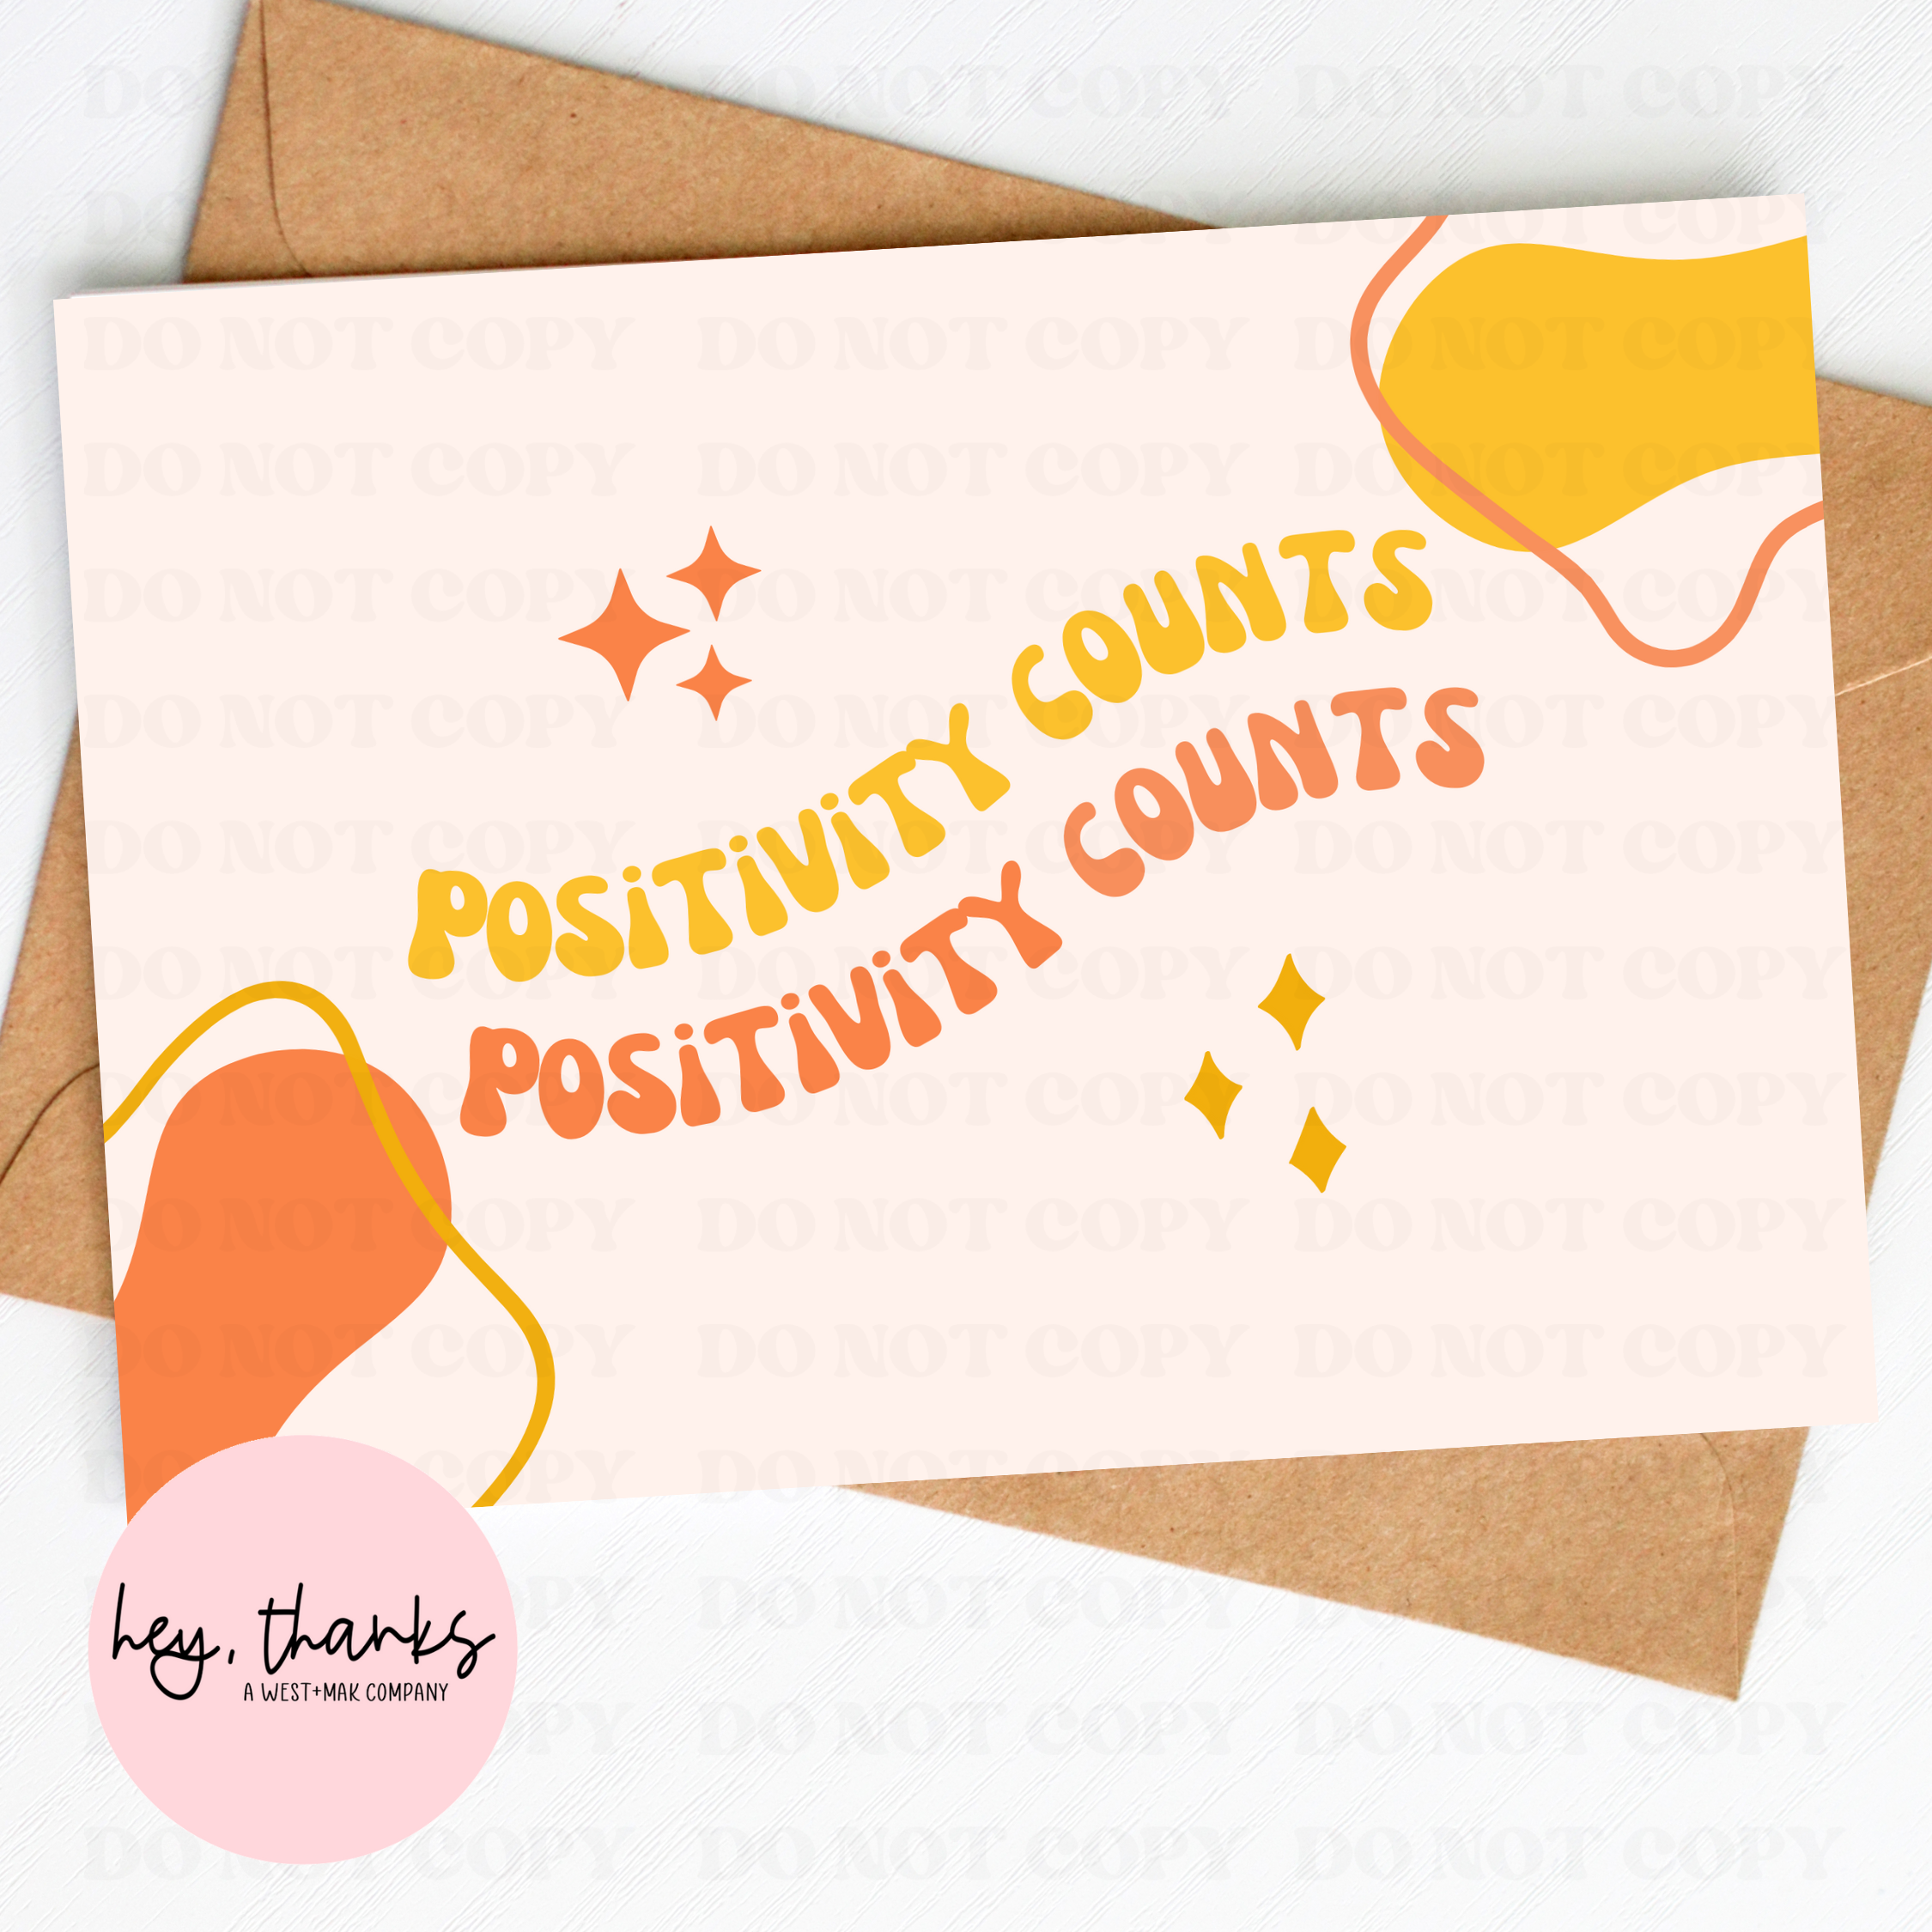 Positivity Counts Insert Cards